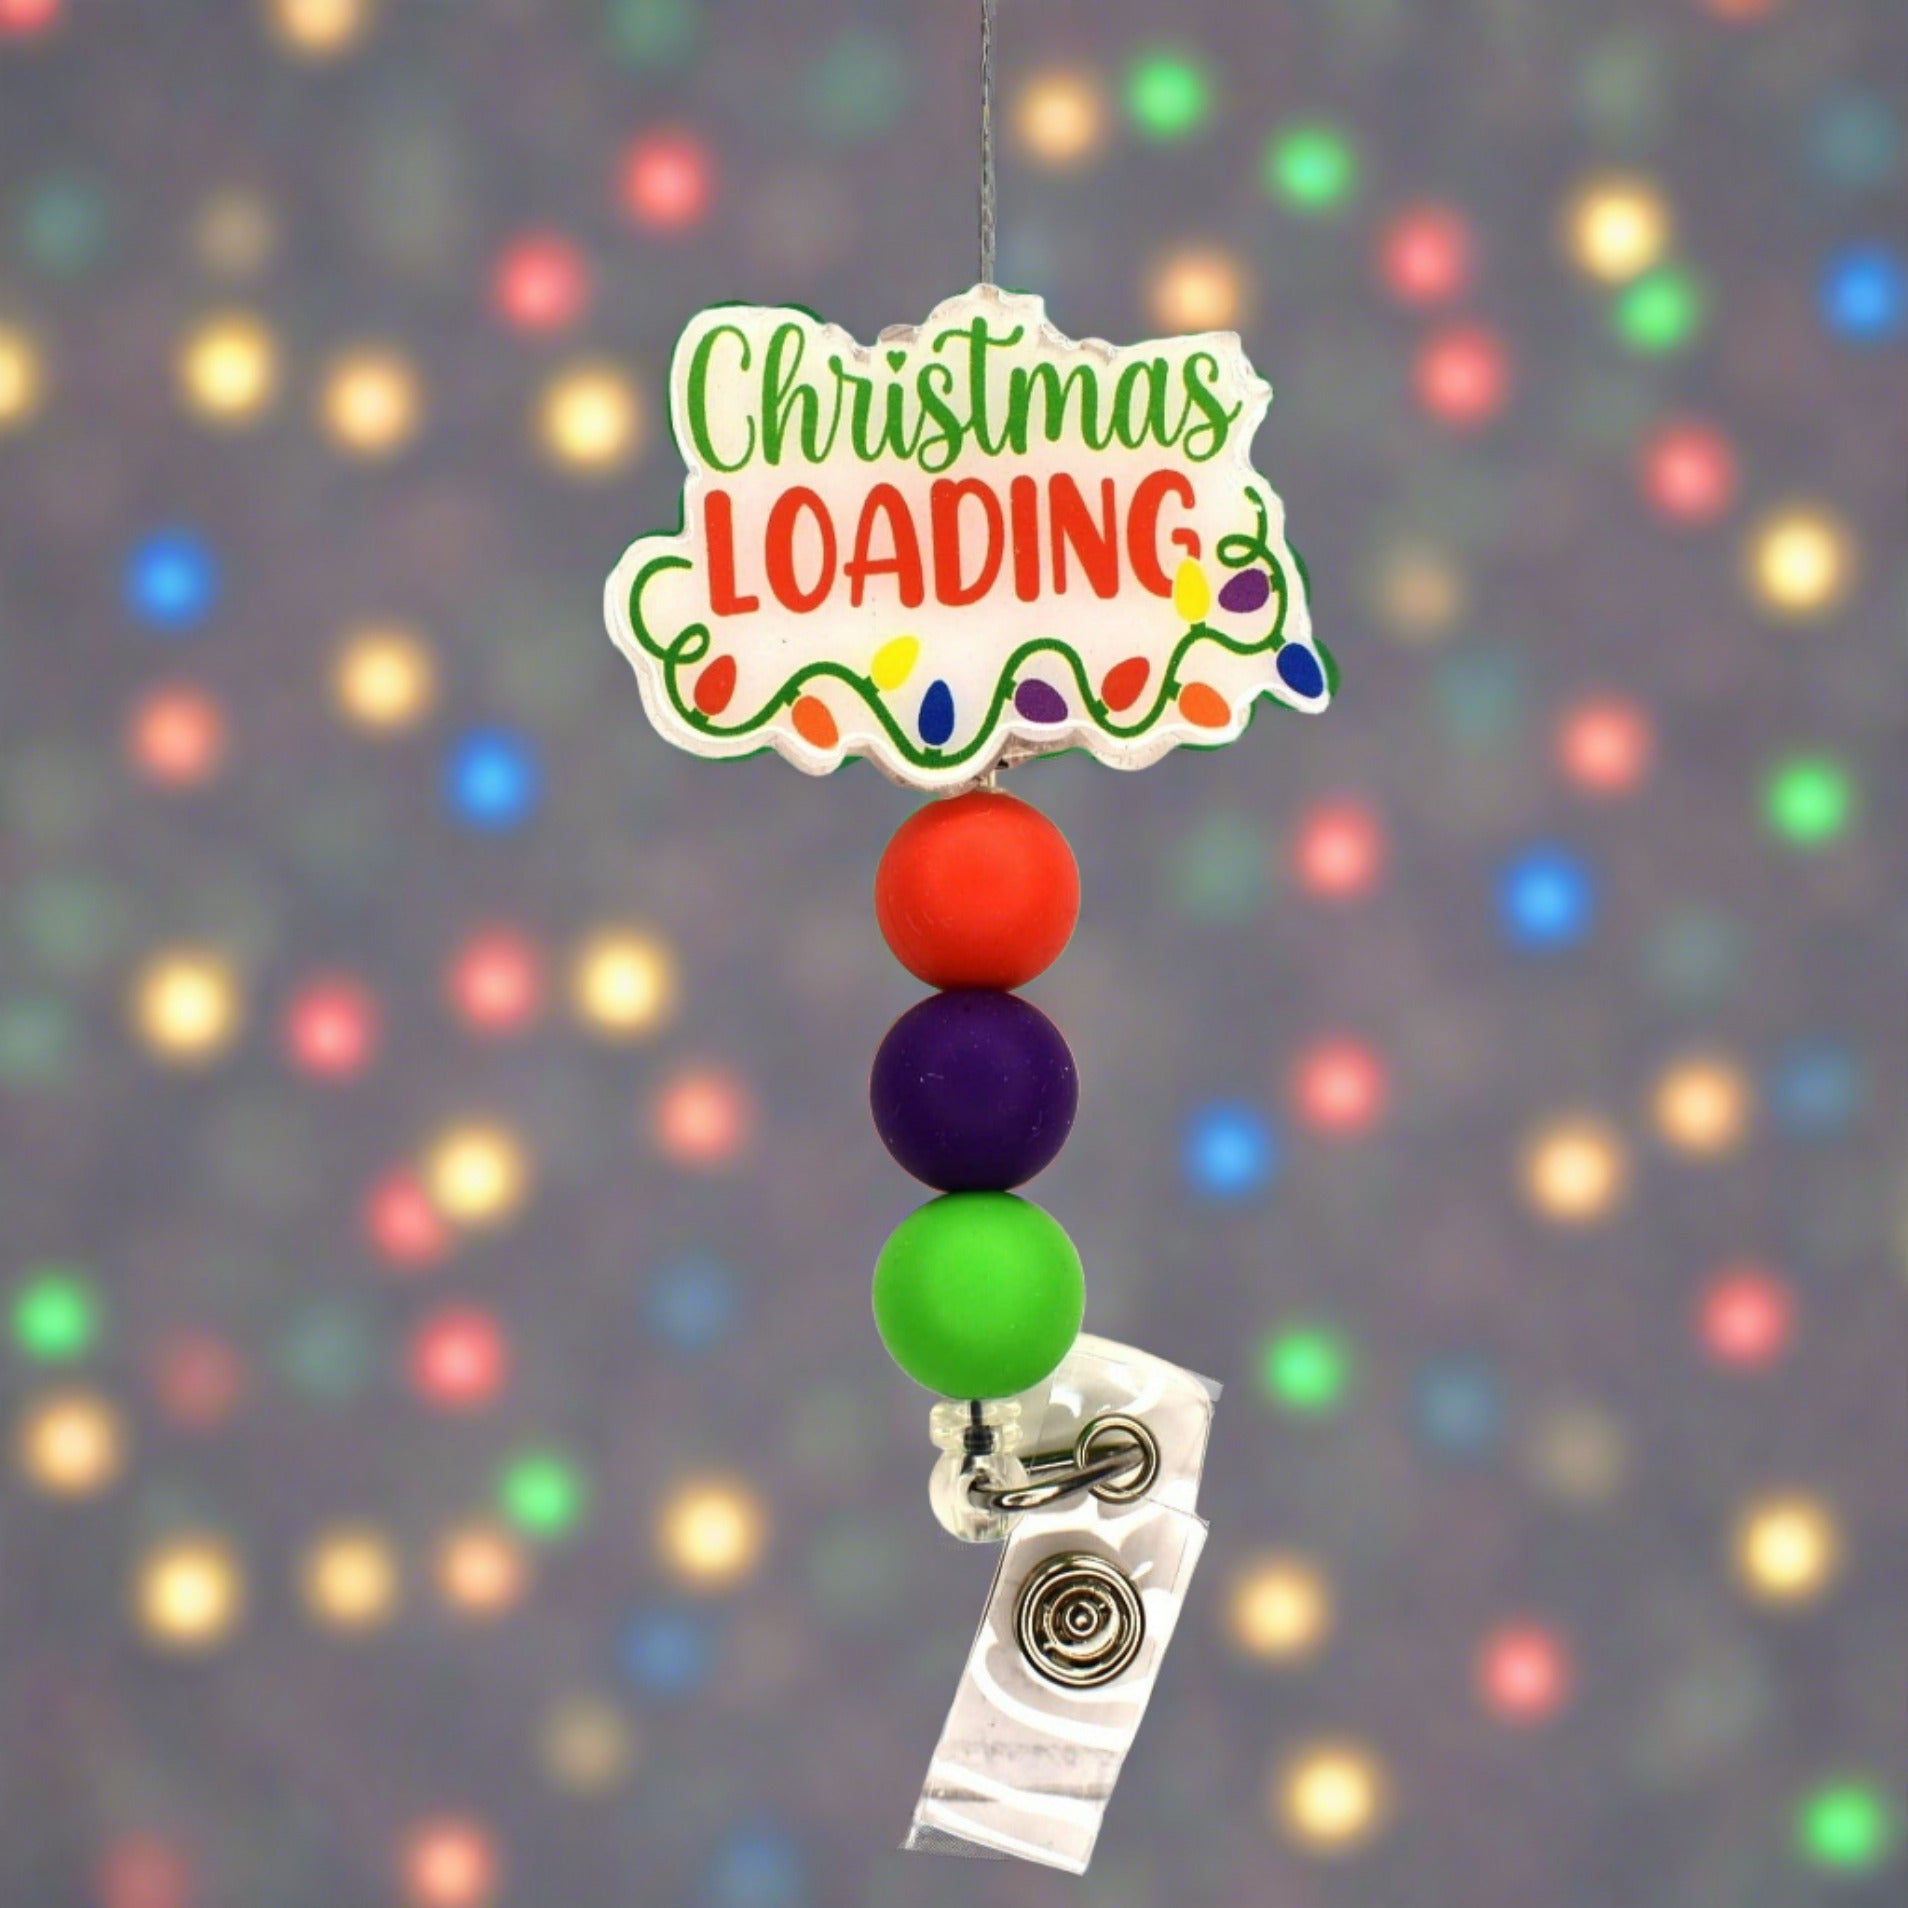 The internet is overloaded and speeds are slowing as Christmas is Loading. This cute badge reel features a glitter base with the phrase Christmas Loading and a string of festive lights.  3 color coordinating silicone beads finish the look.